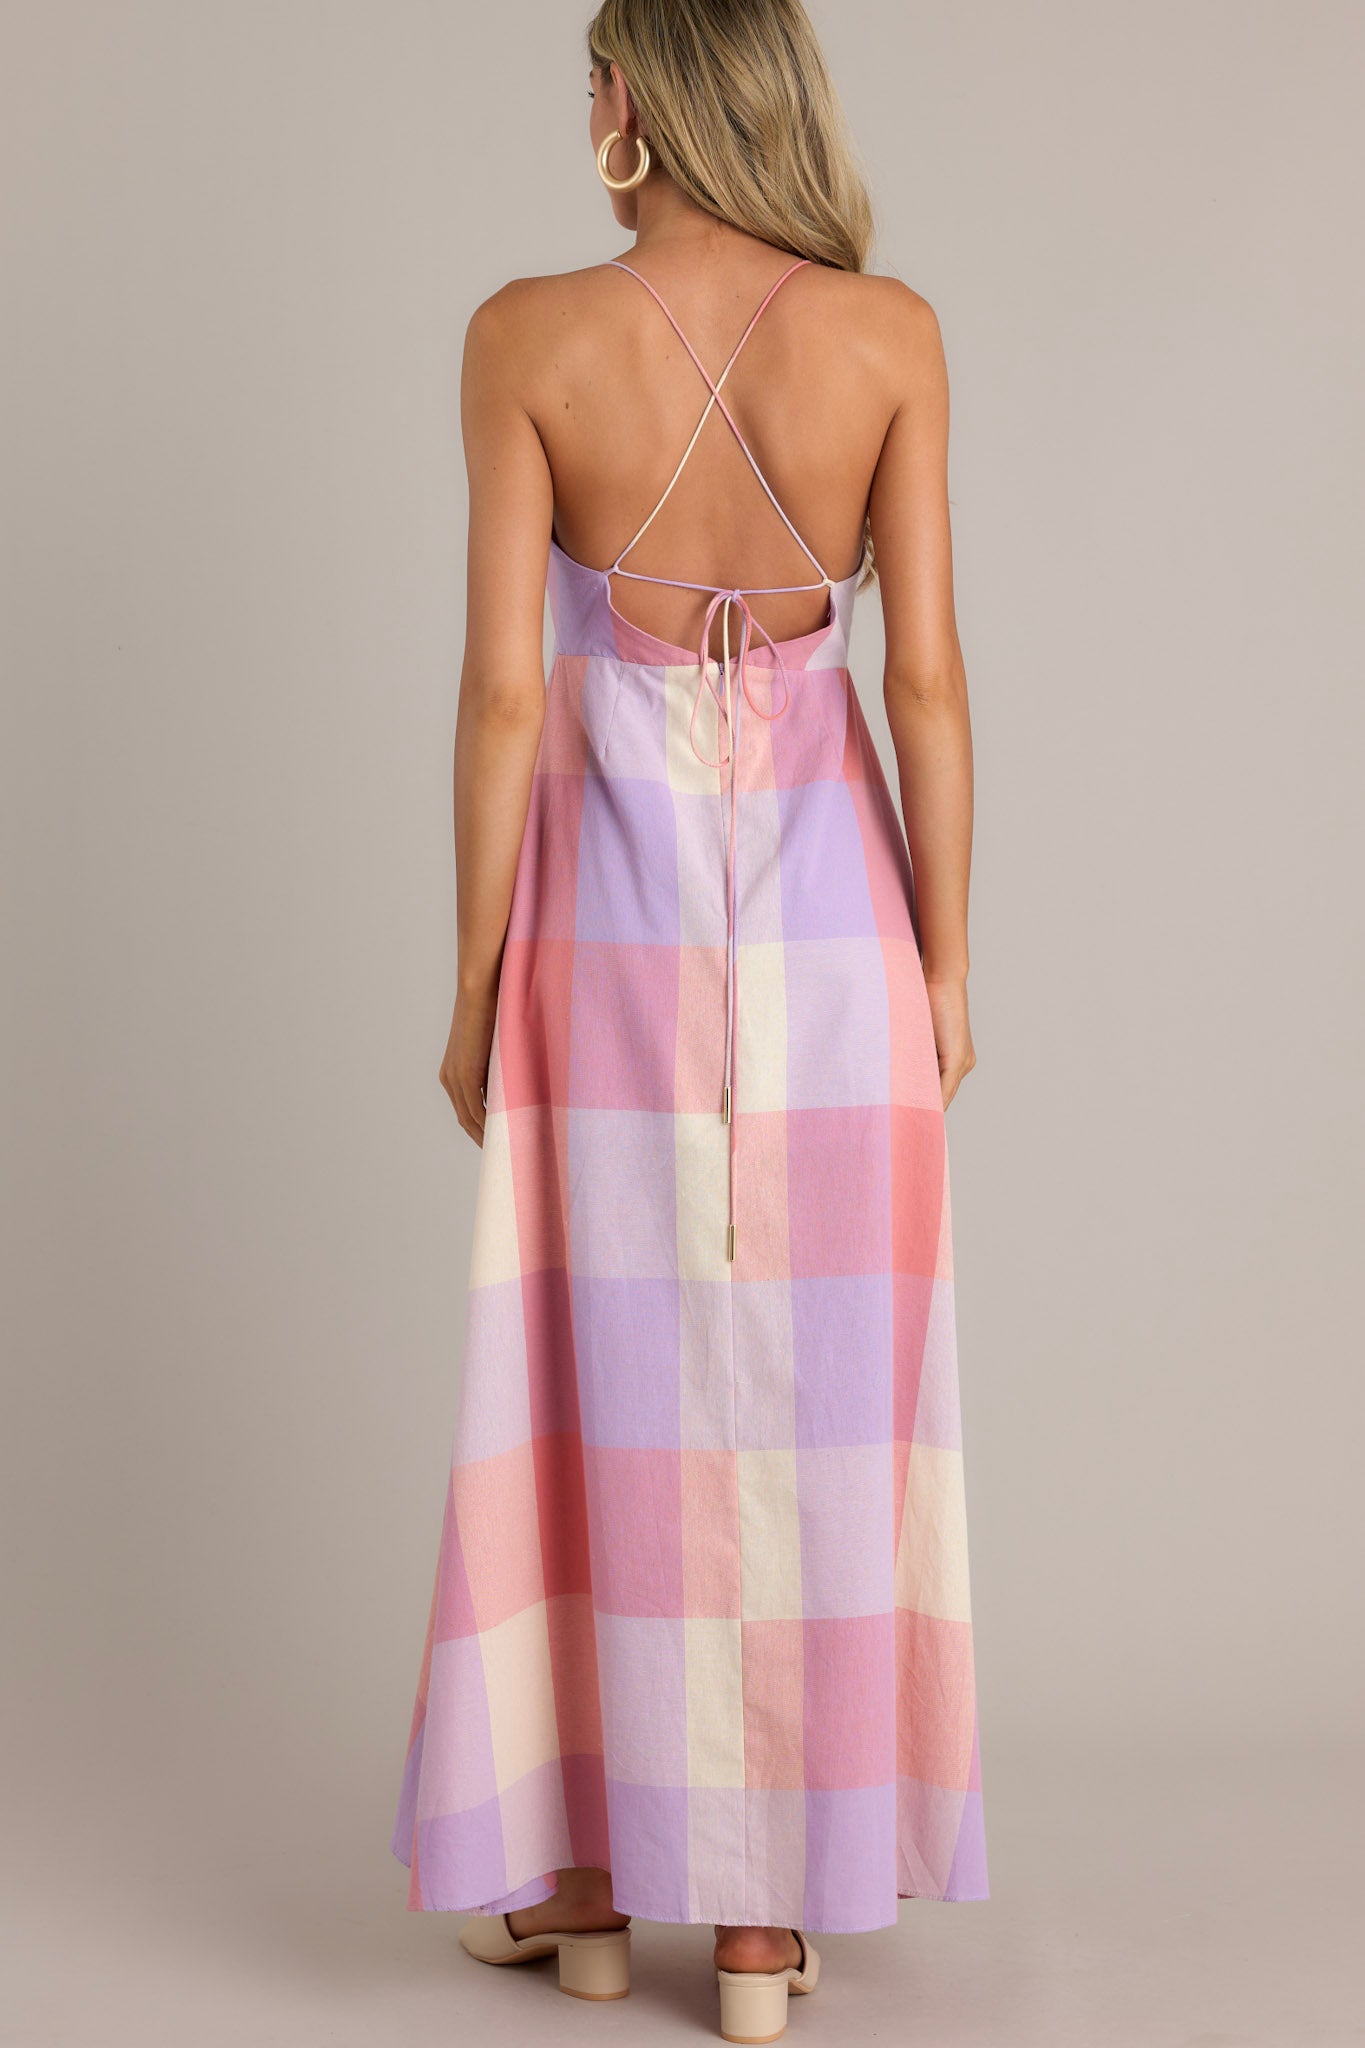 Back view of a pink maxi dress featuring an open back with thin self-tie straps that cross, a discrete back zipper, and a flowing plaid pattern.